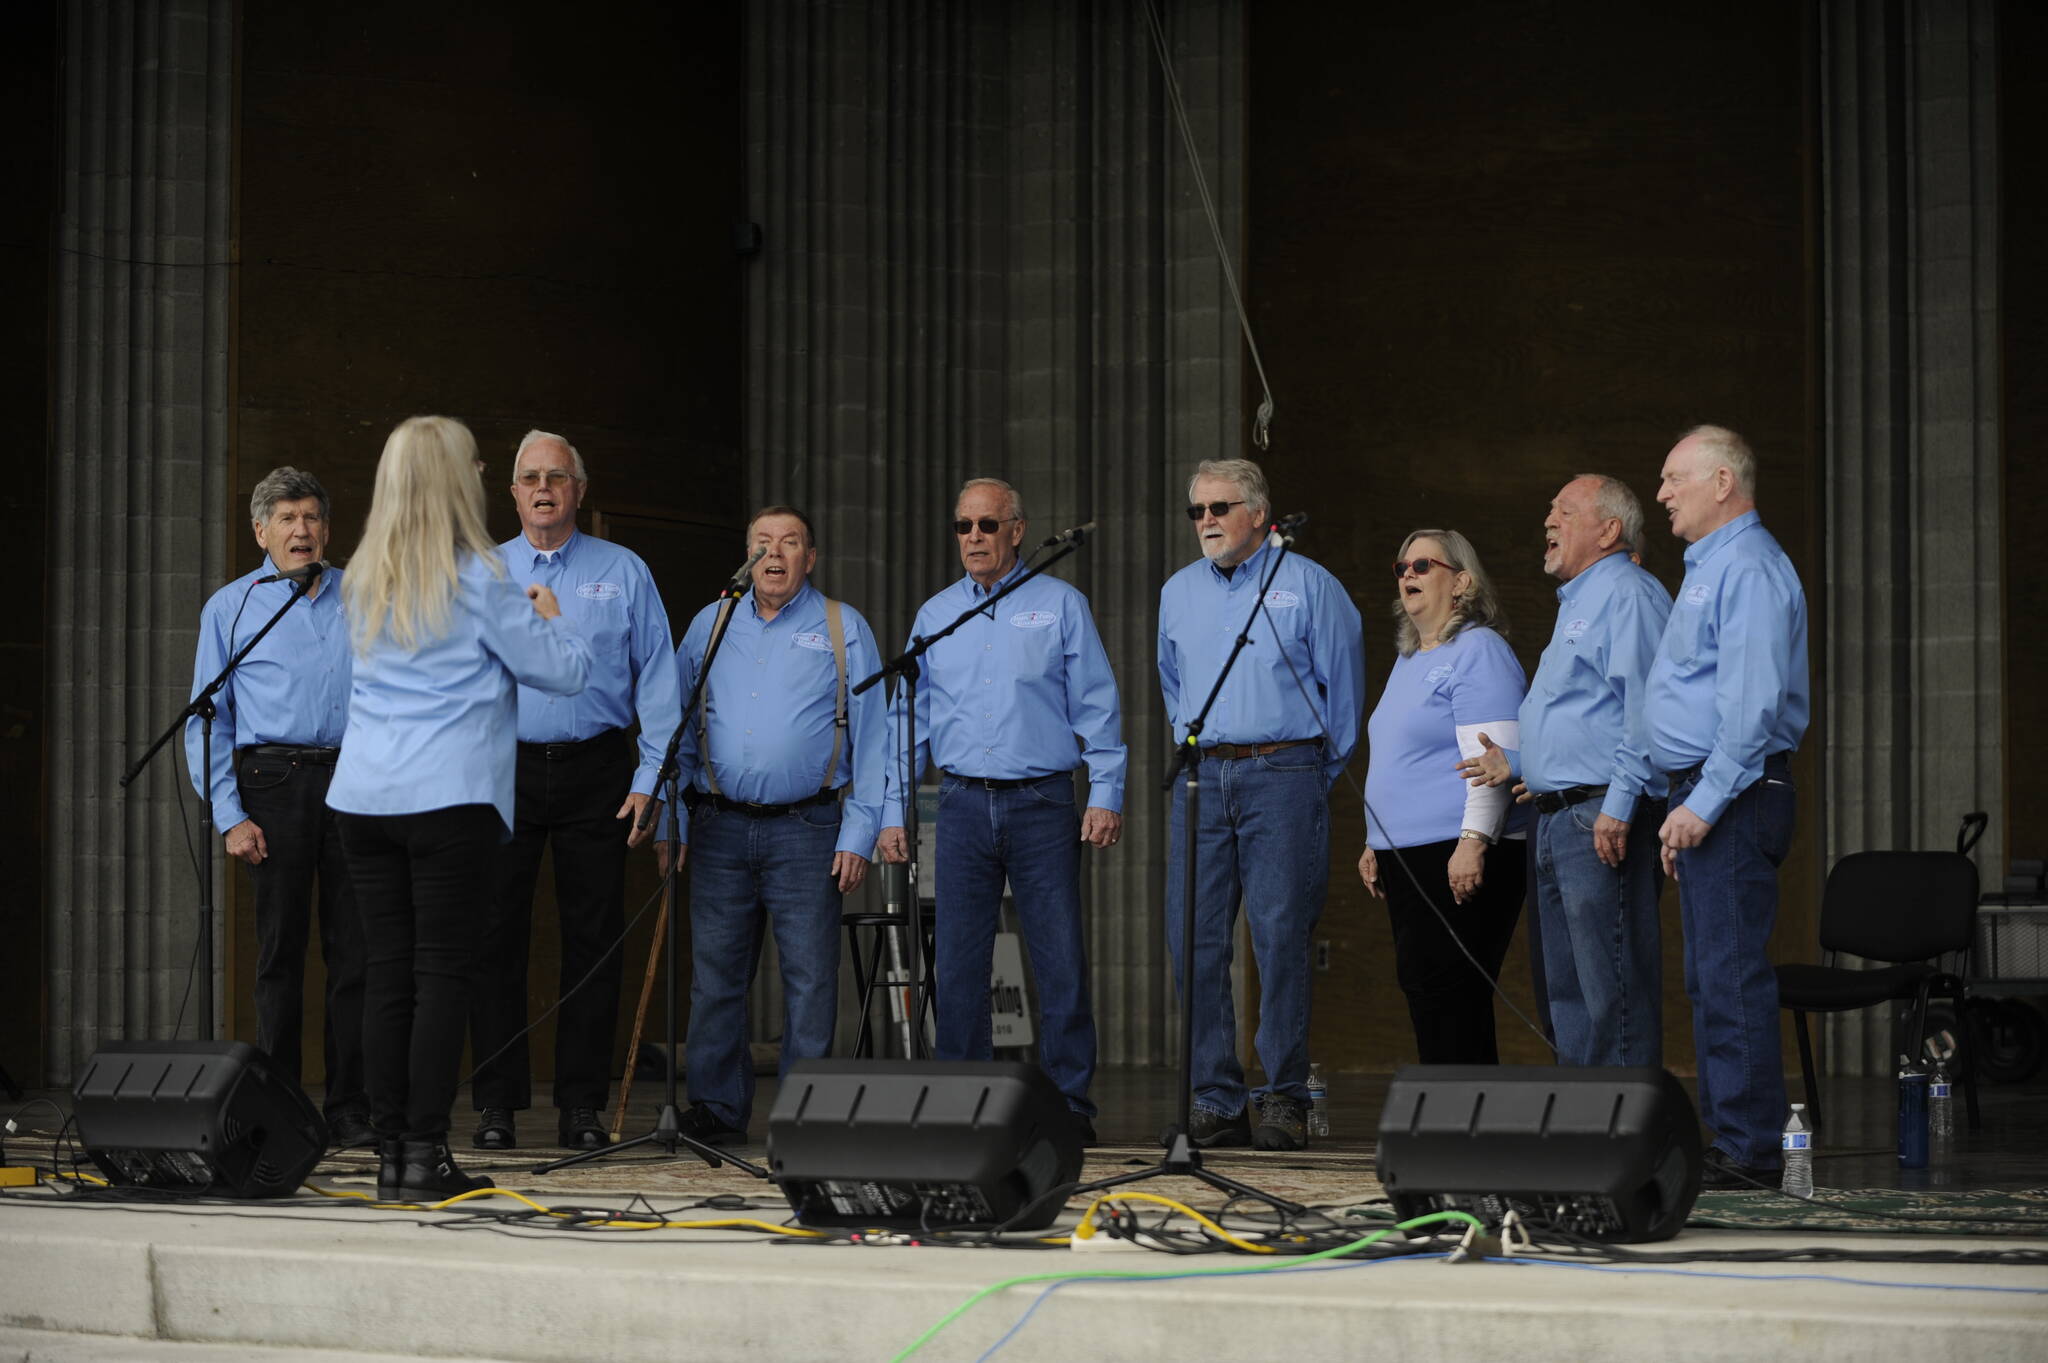 Sequim Gazette photo by Michael Dashiell / Juan de Fuca Harmony, a mixed singing group, entertains the Sequim Irrigation Festival crowd at Carrie Blake Community Park on May 6.